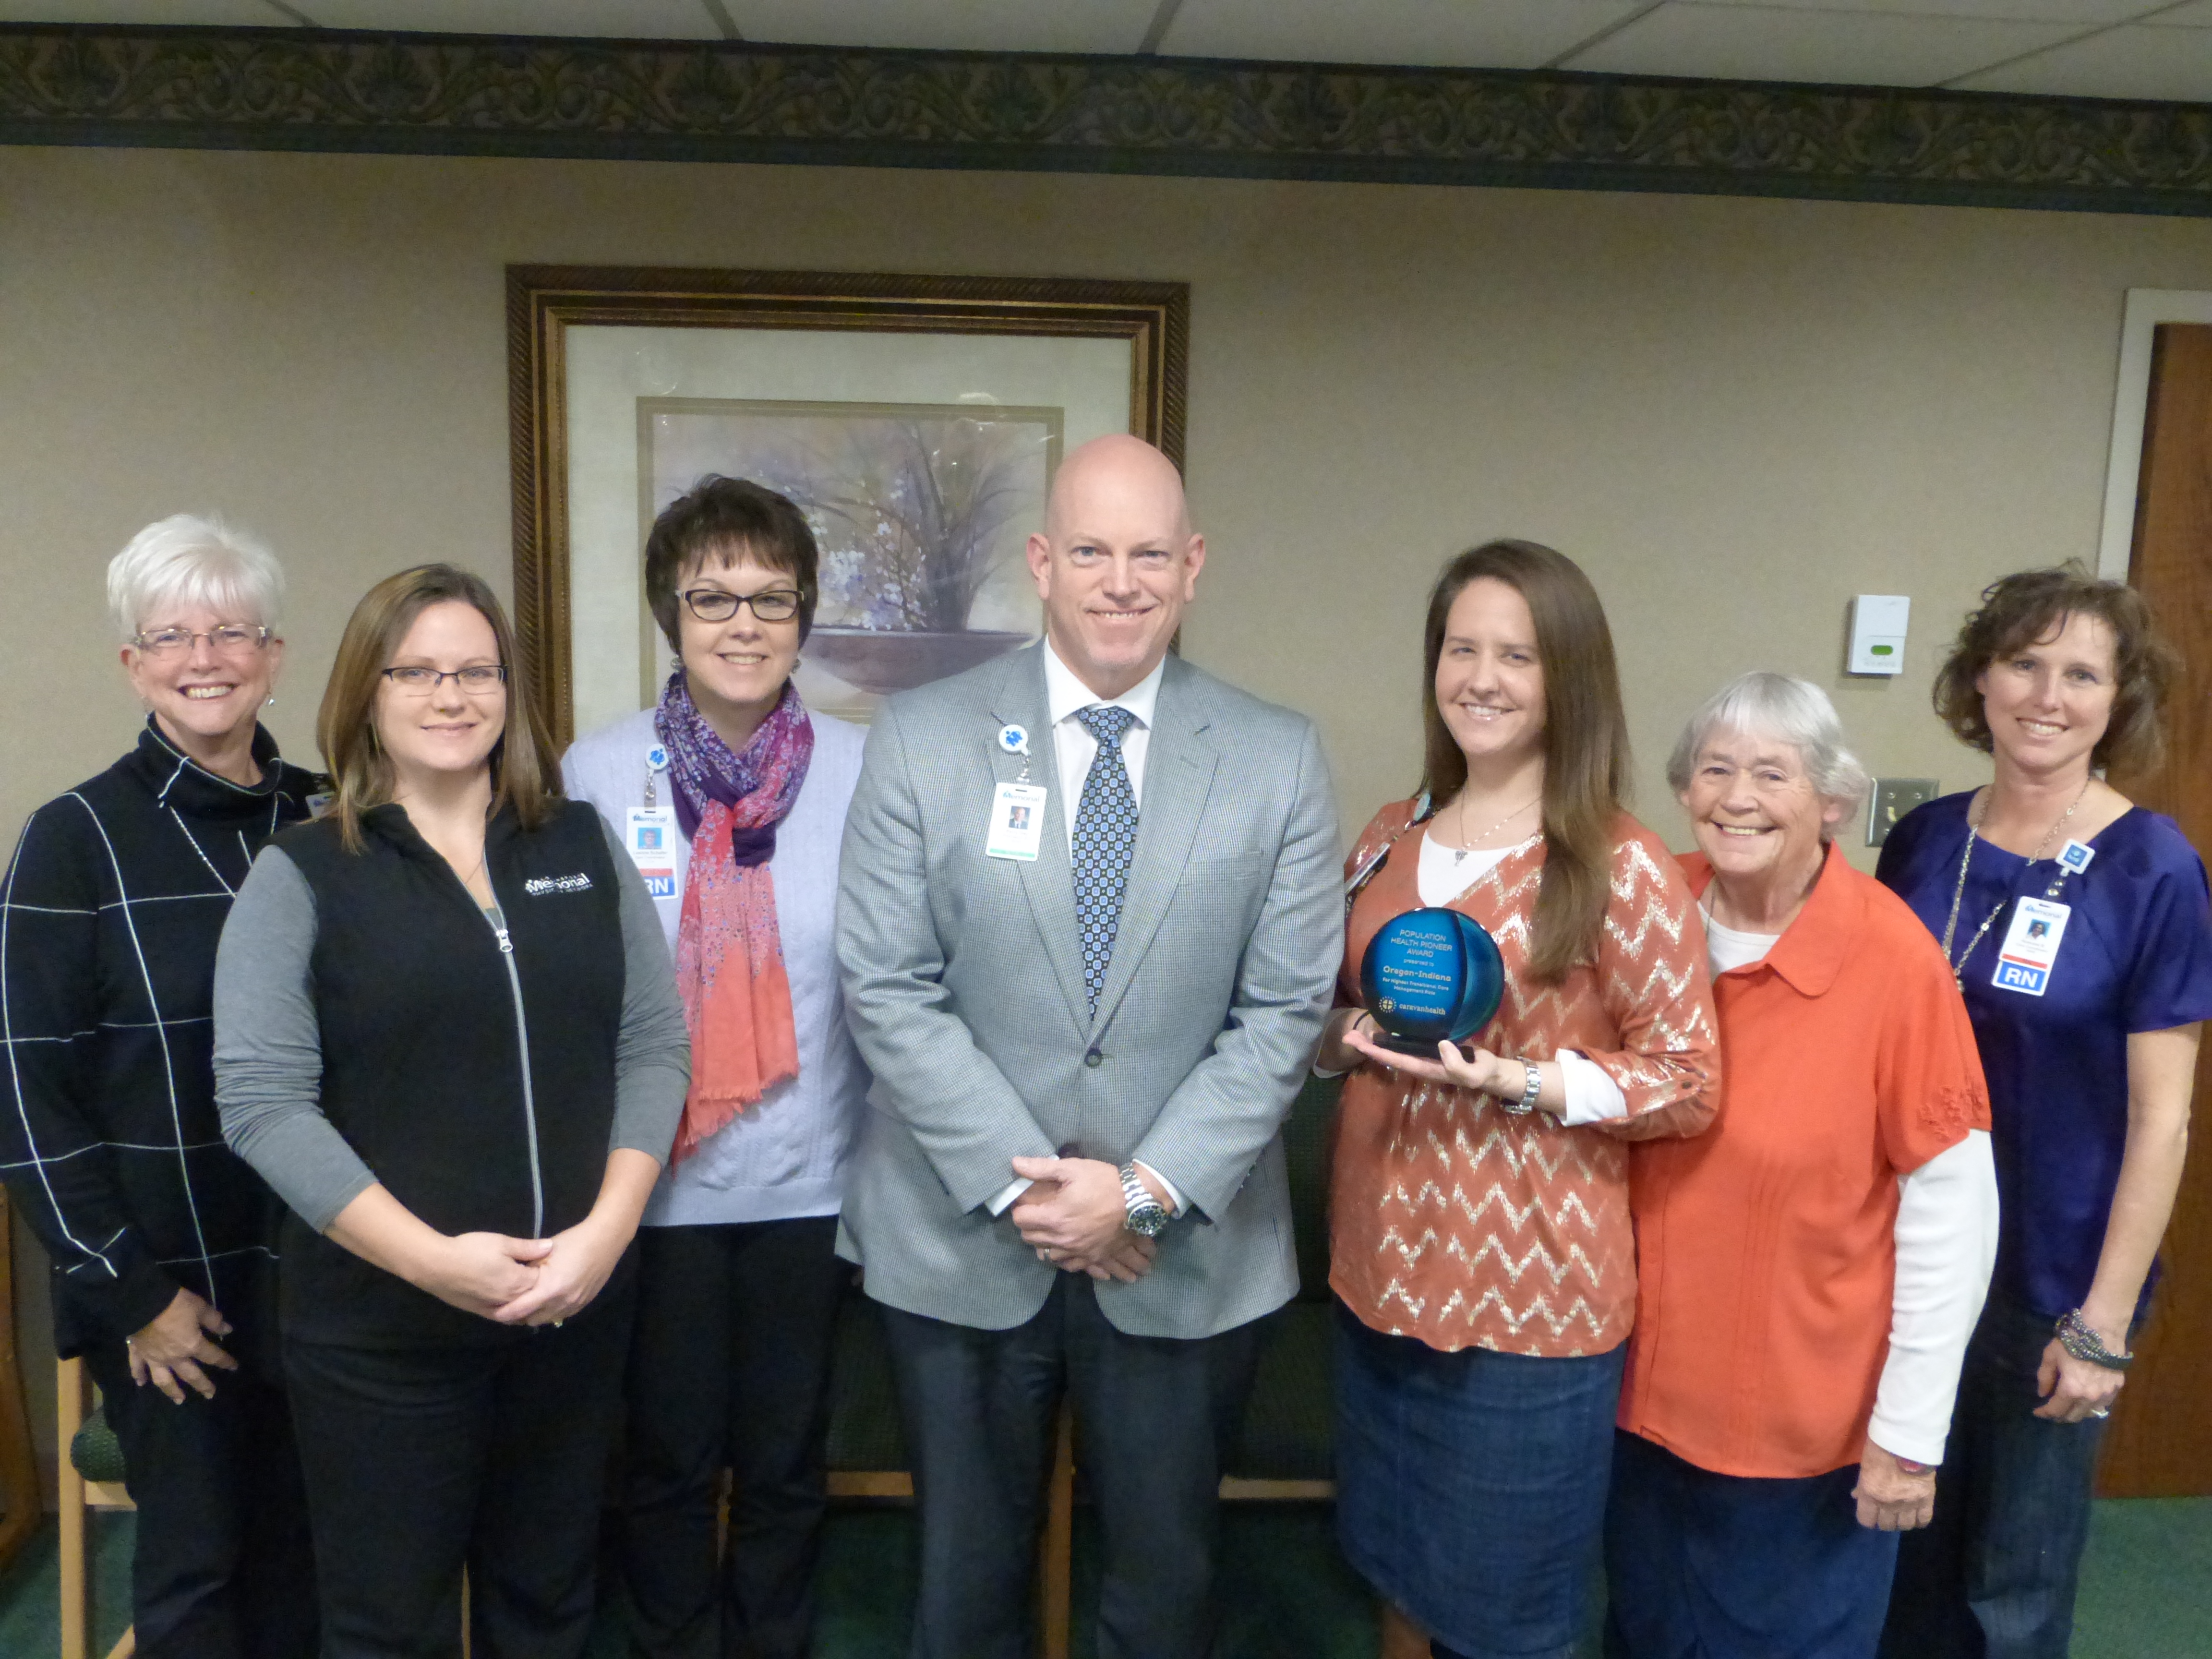 Thumbnail for the post titled: Logansport Memorial Hospital recognized for outstanding care coordination services from Caravan Health